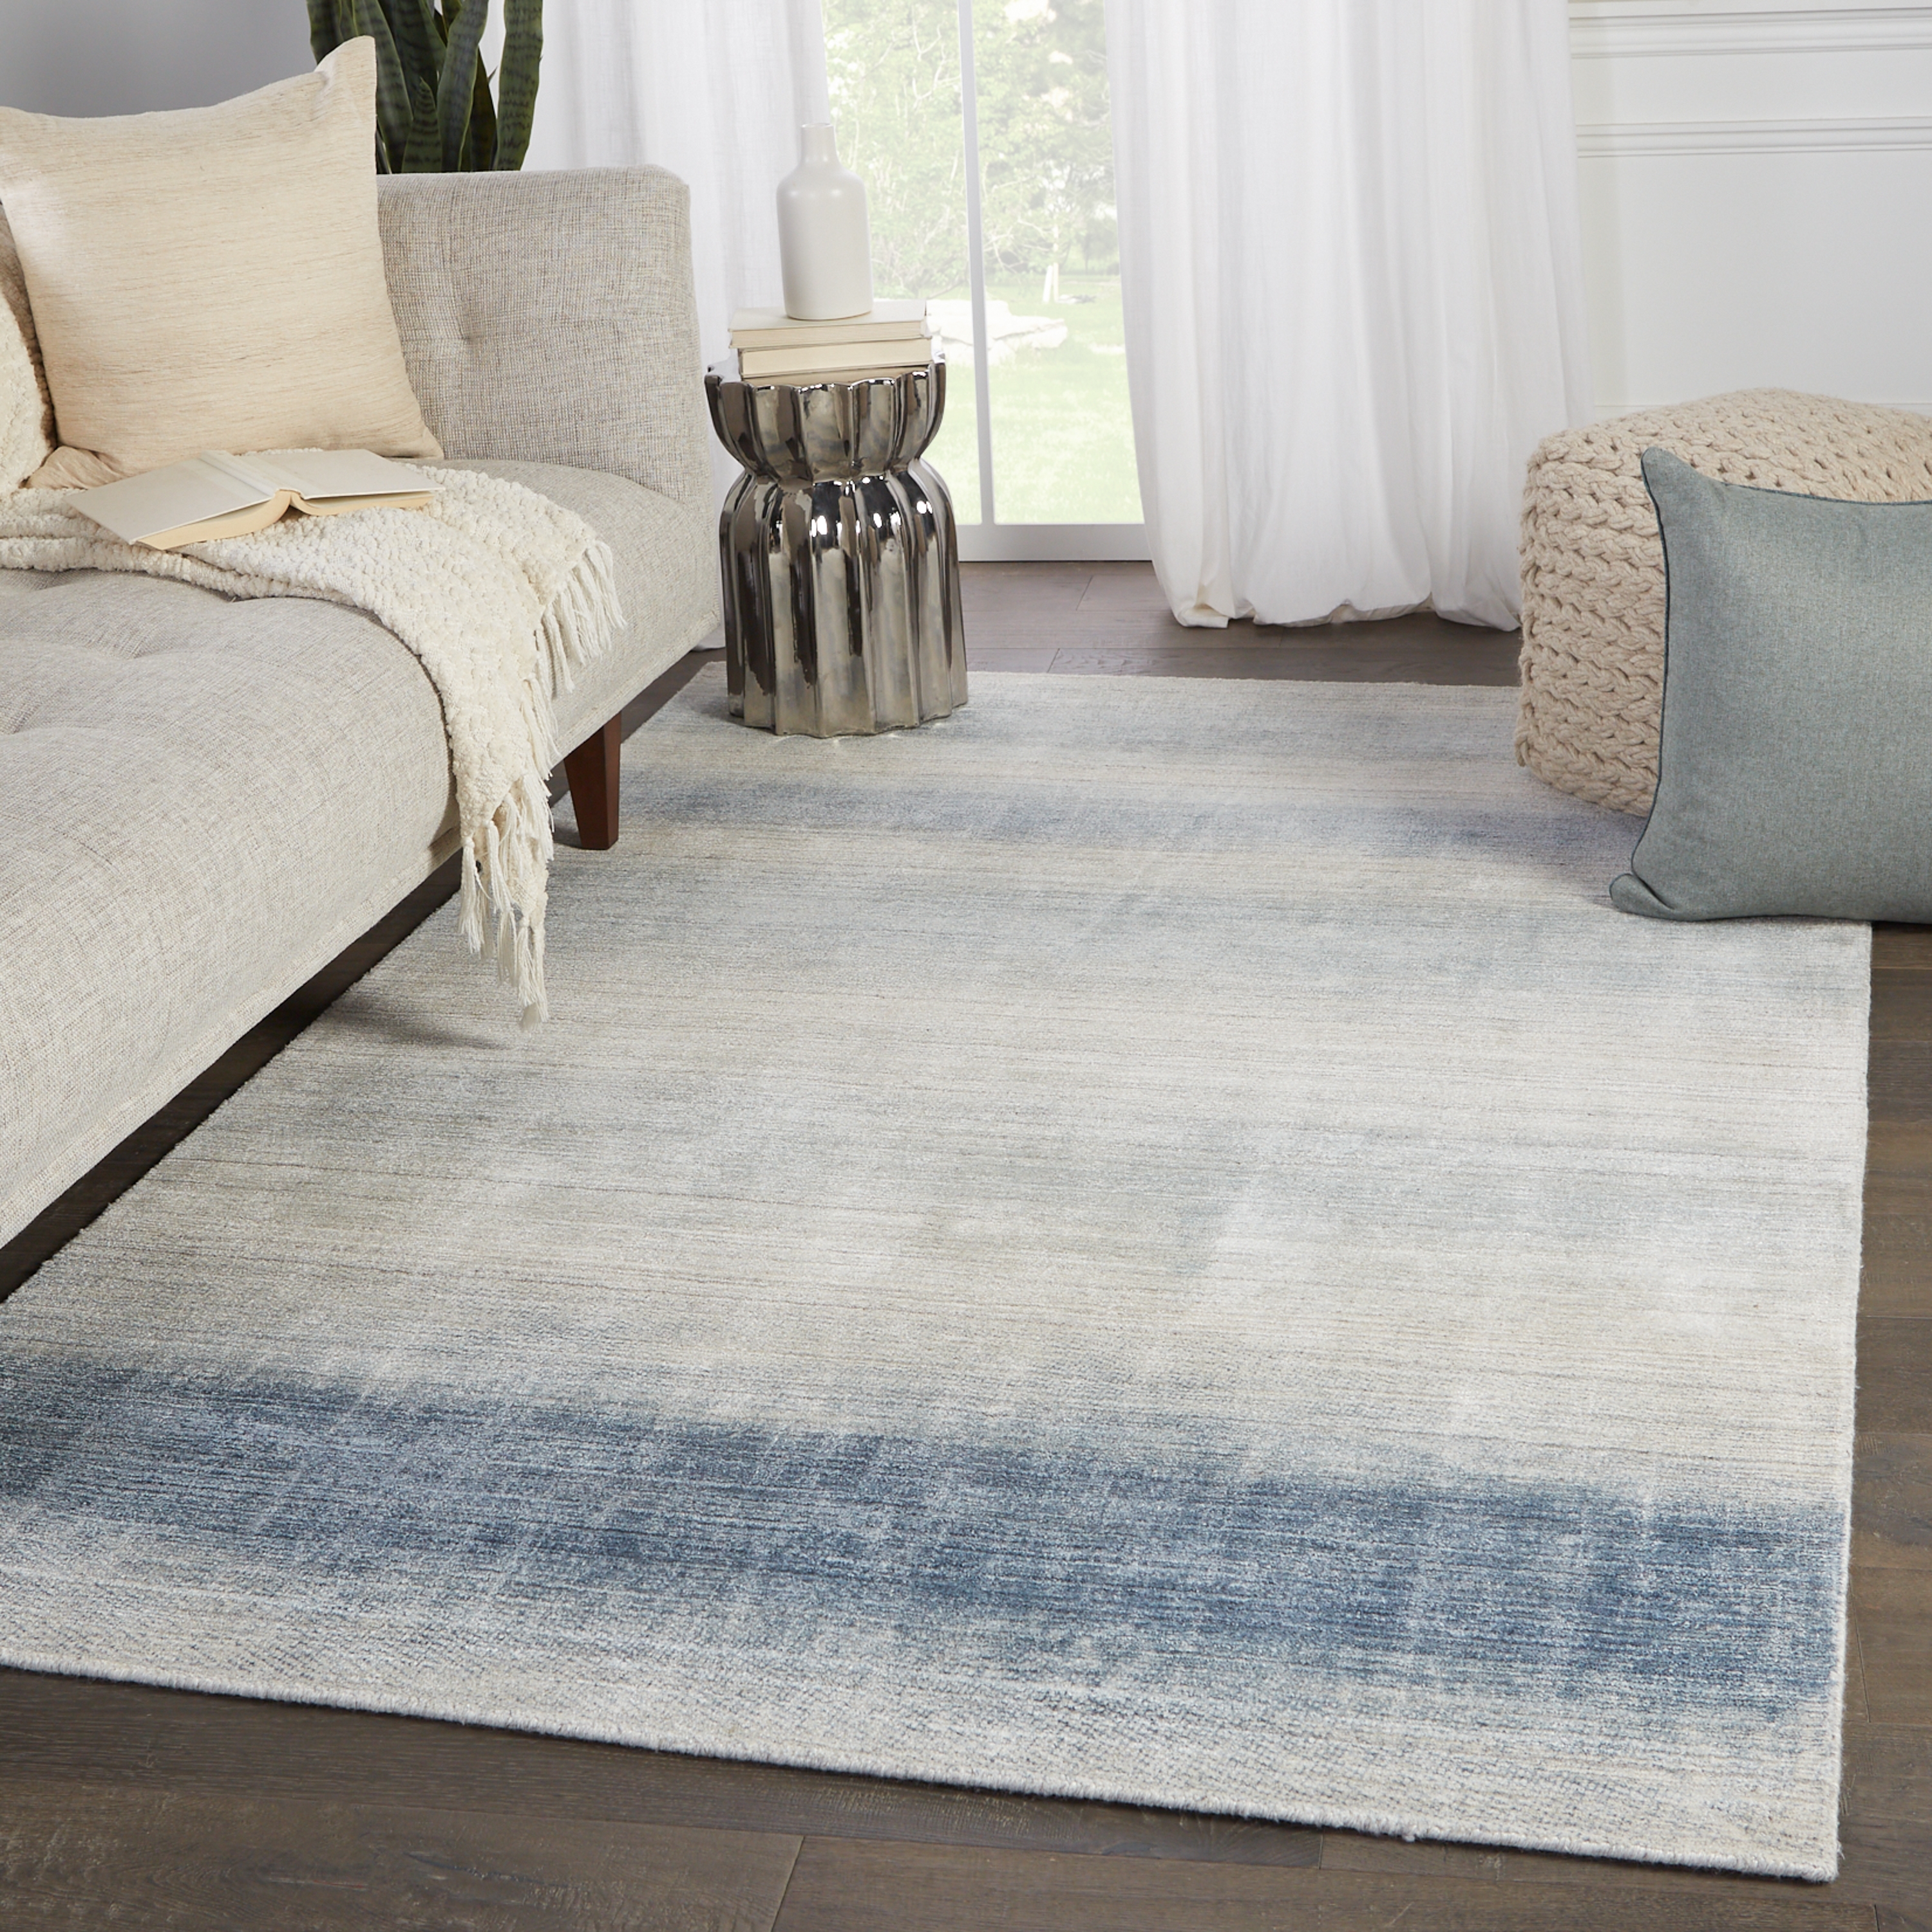 Barclay Butera by Bayshores Handmade Ombre Blue/ Beige Area Rug  (6'X9') - Image 4